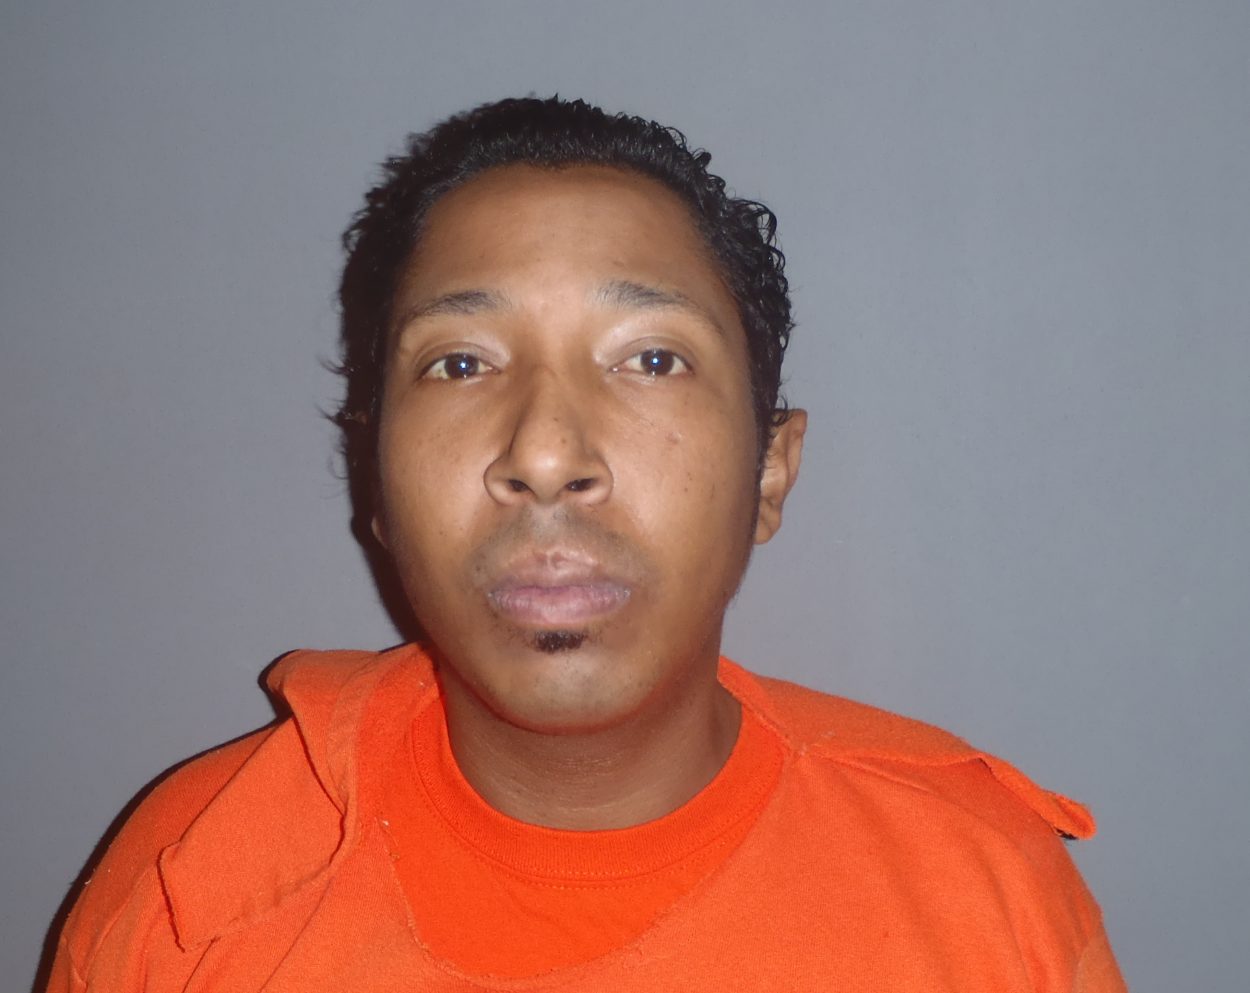 Petersburg police arrest man wanted in two other states